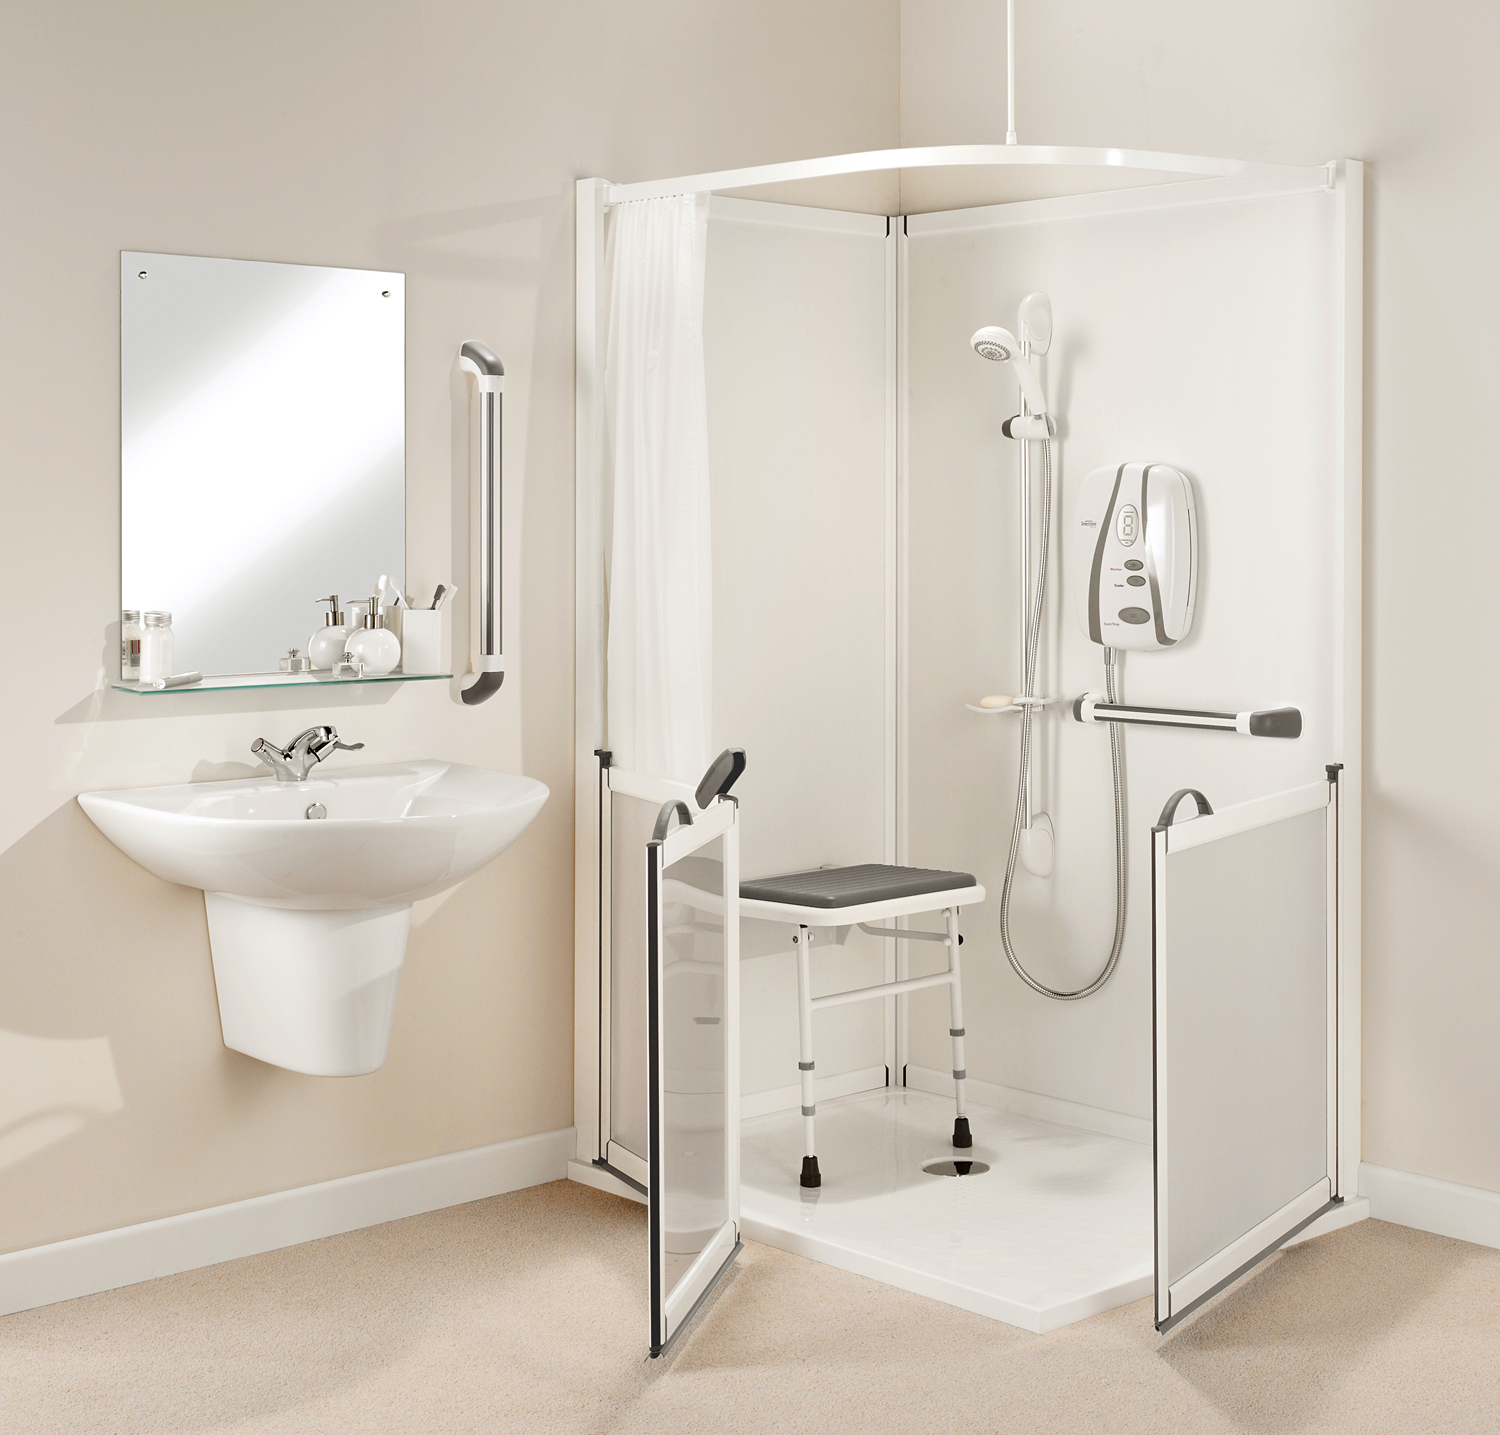 Wet Room Conversions | Disabled Bathrooms | East Coast Mobility